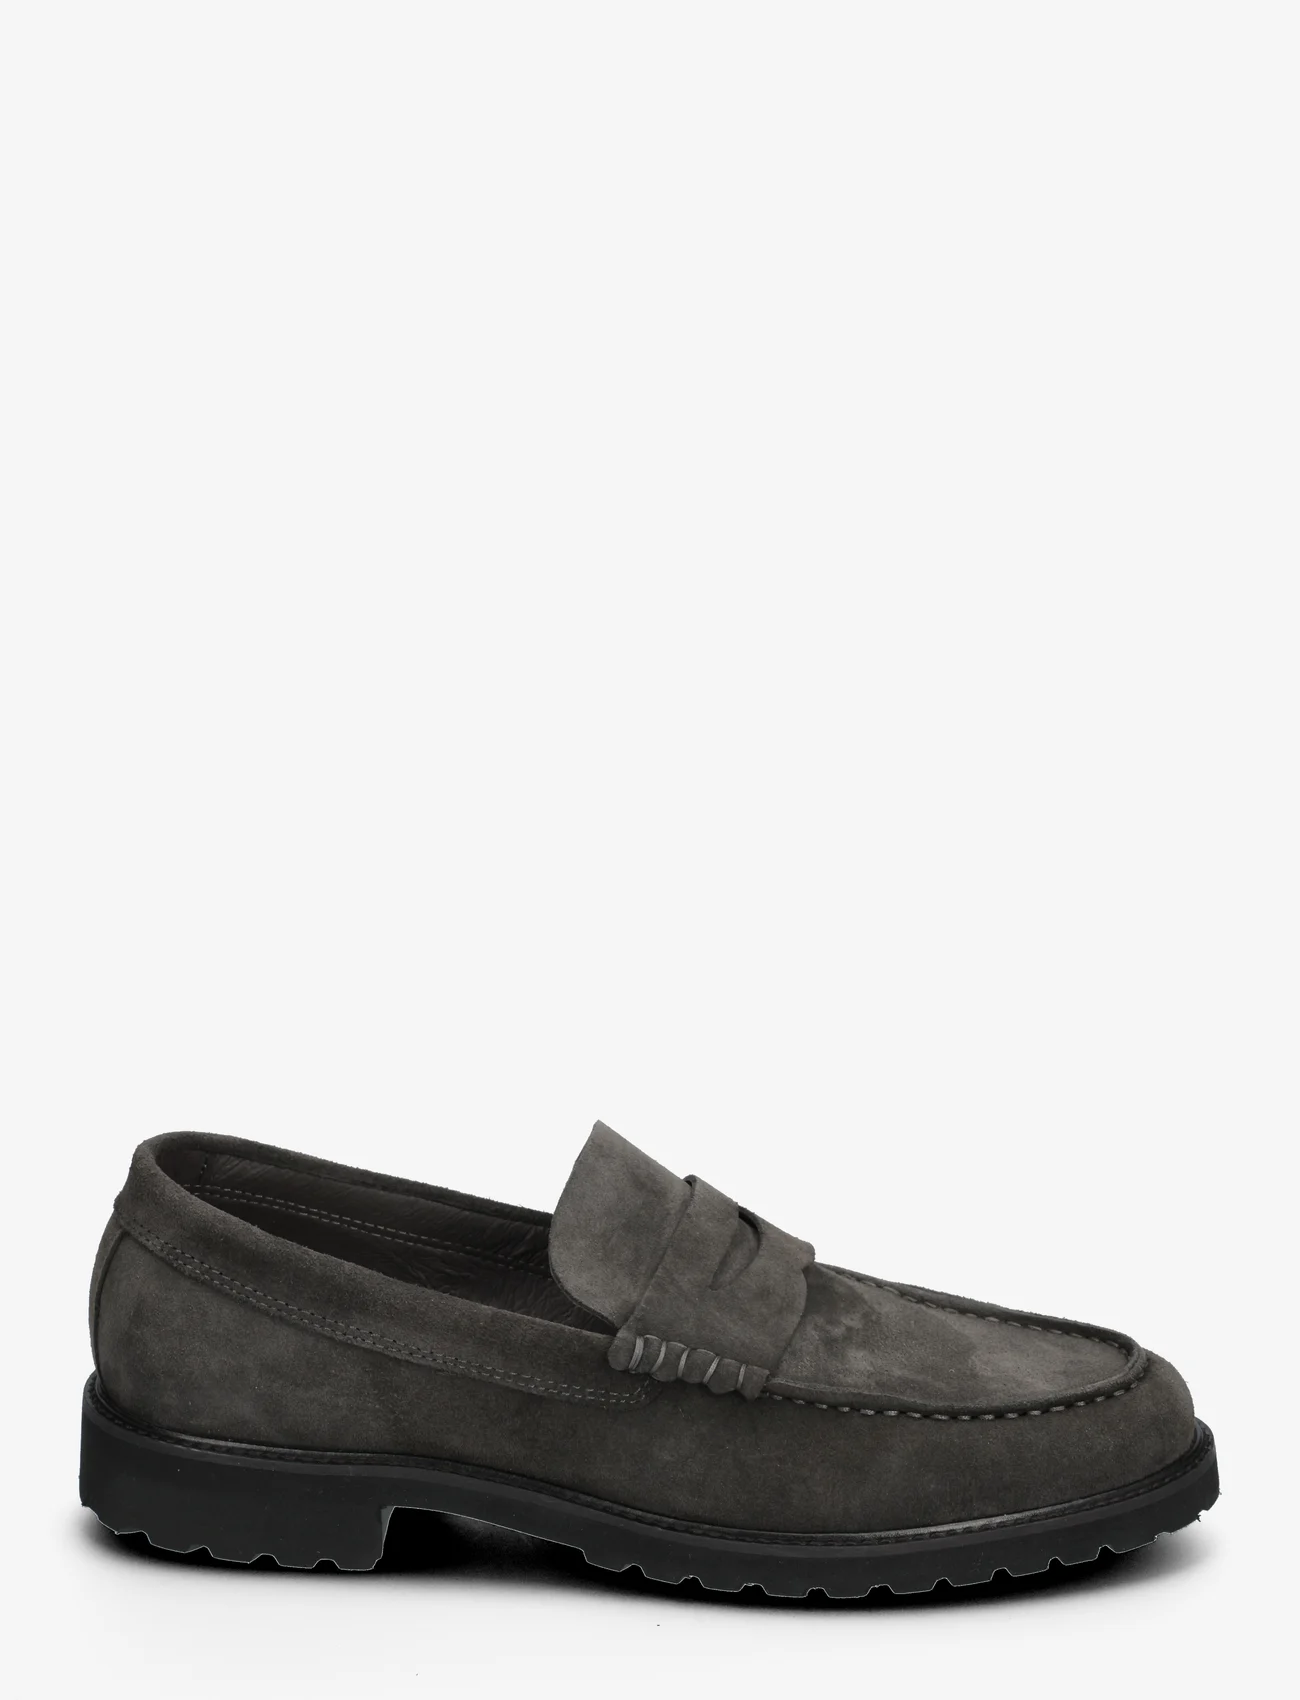 Garment Project - Penny Loafer - Charcoal Suede - nordic style - charcoal - 1